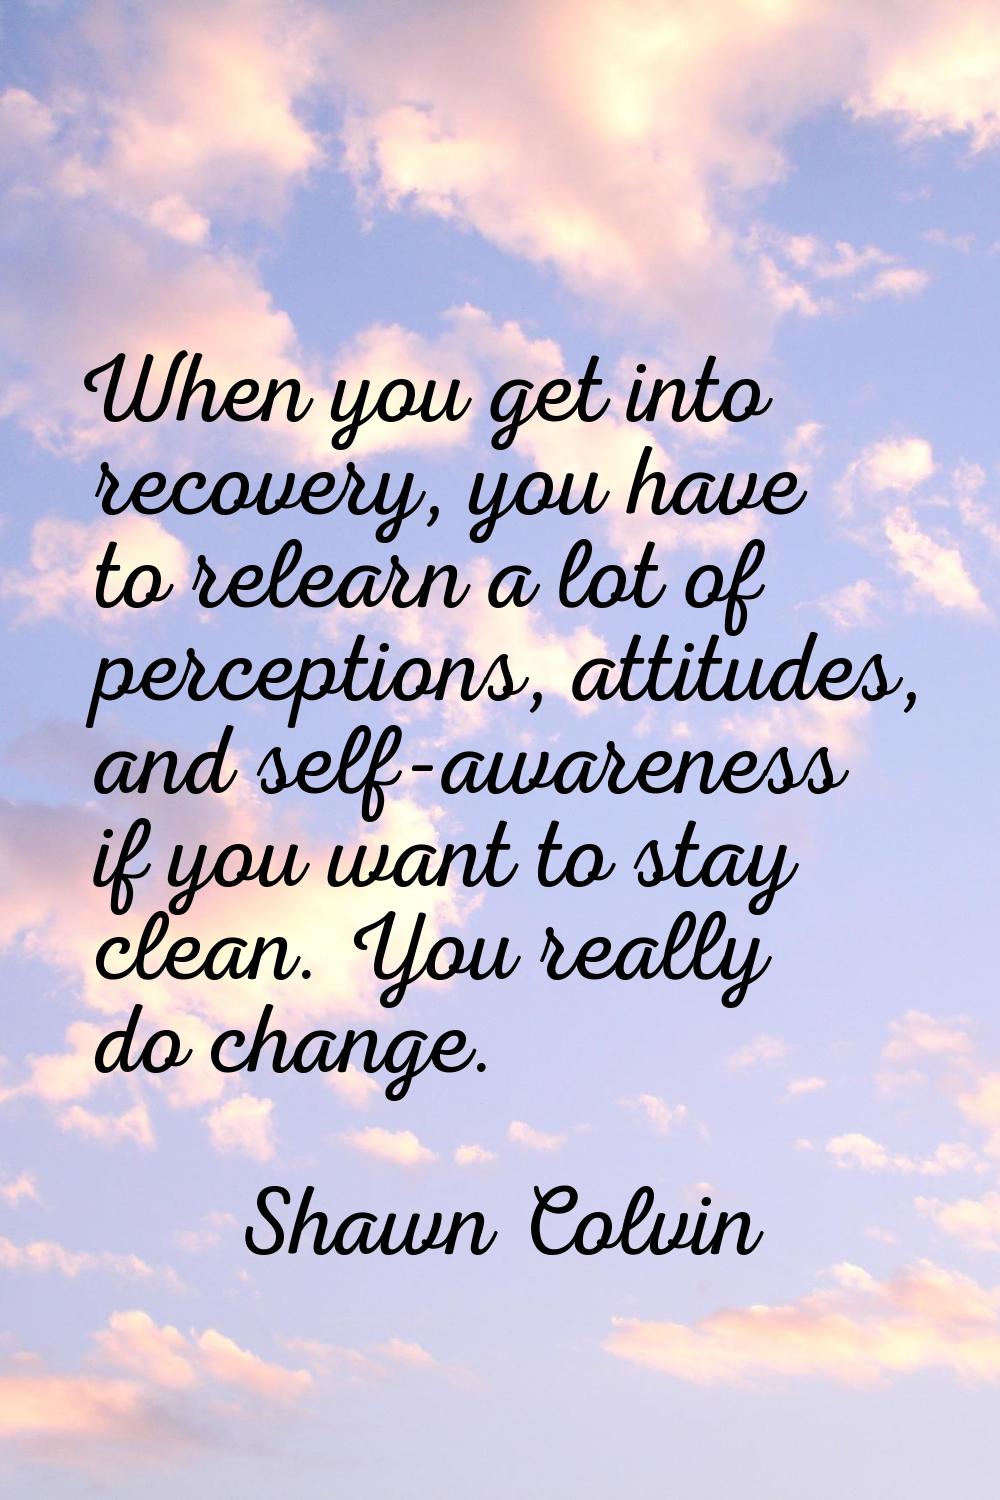 When you get into recovery, you have to relearn a lot of perceptions, attitudes, and self-awareness